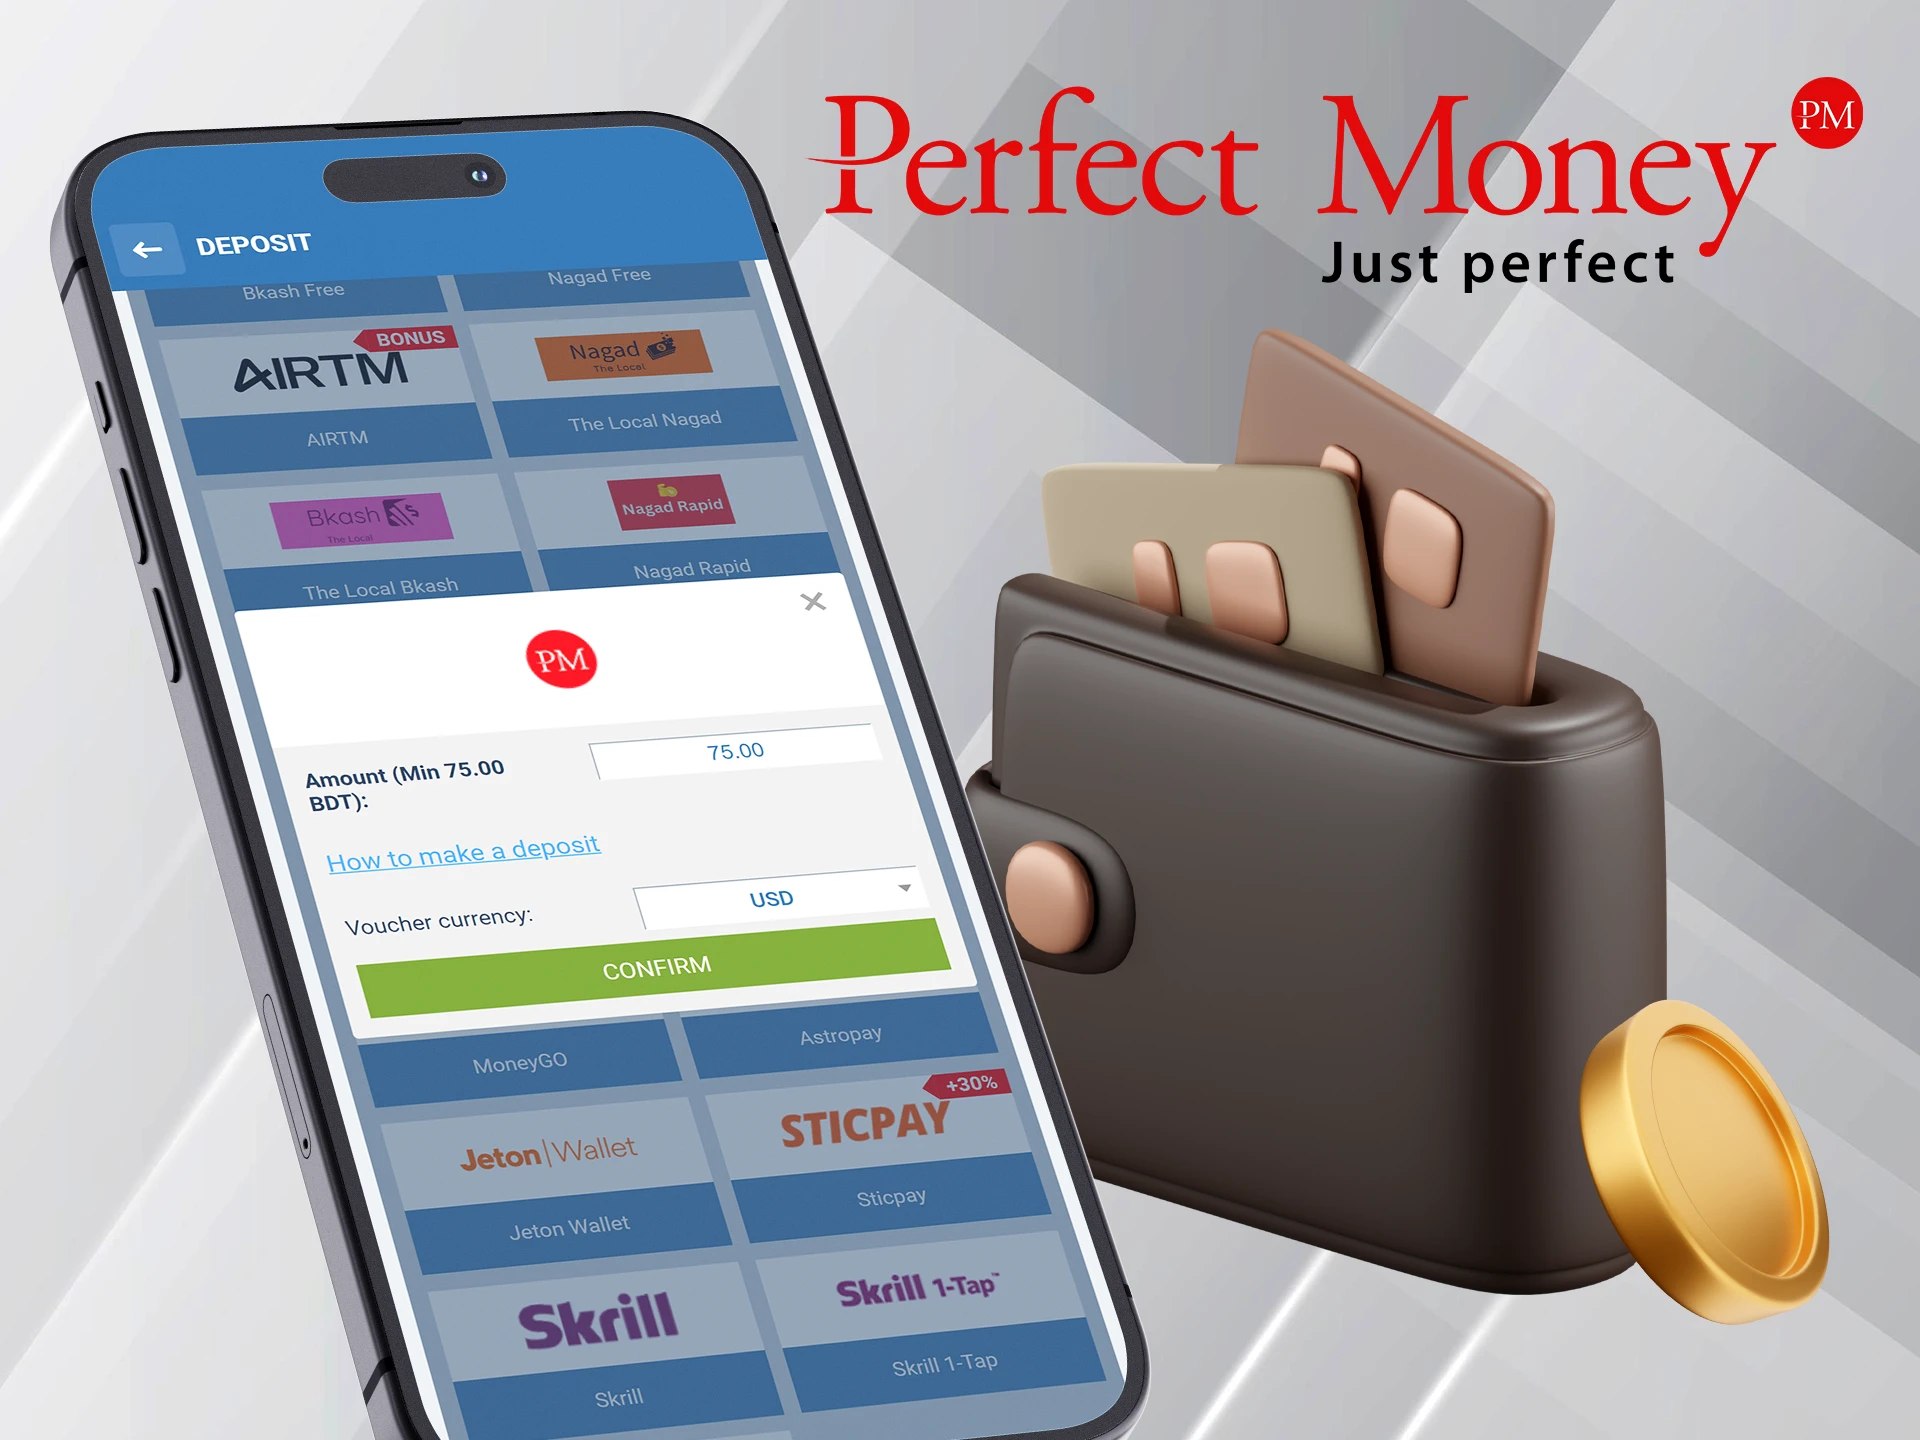 Perfect Money is a convenient system for deposits and withdrawals.